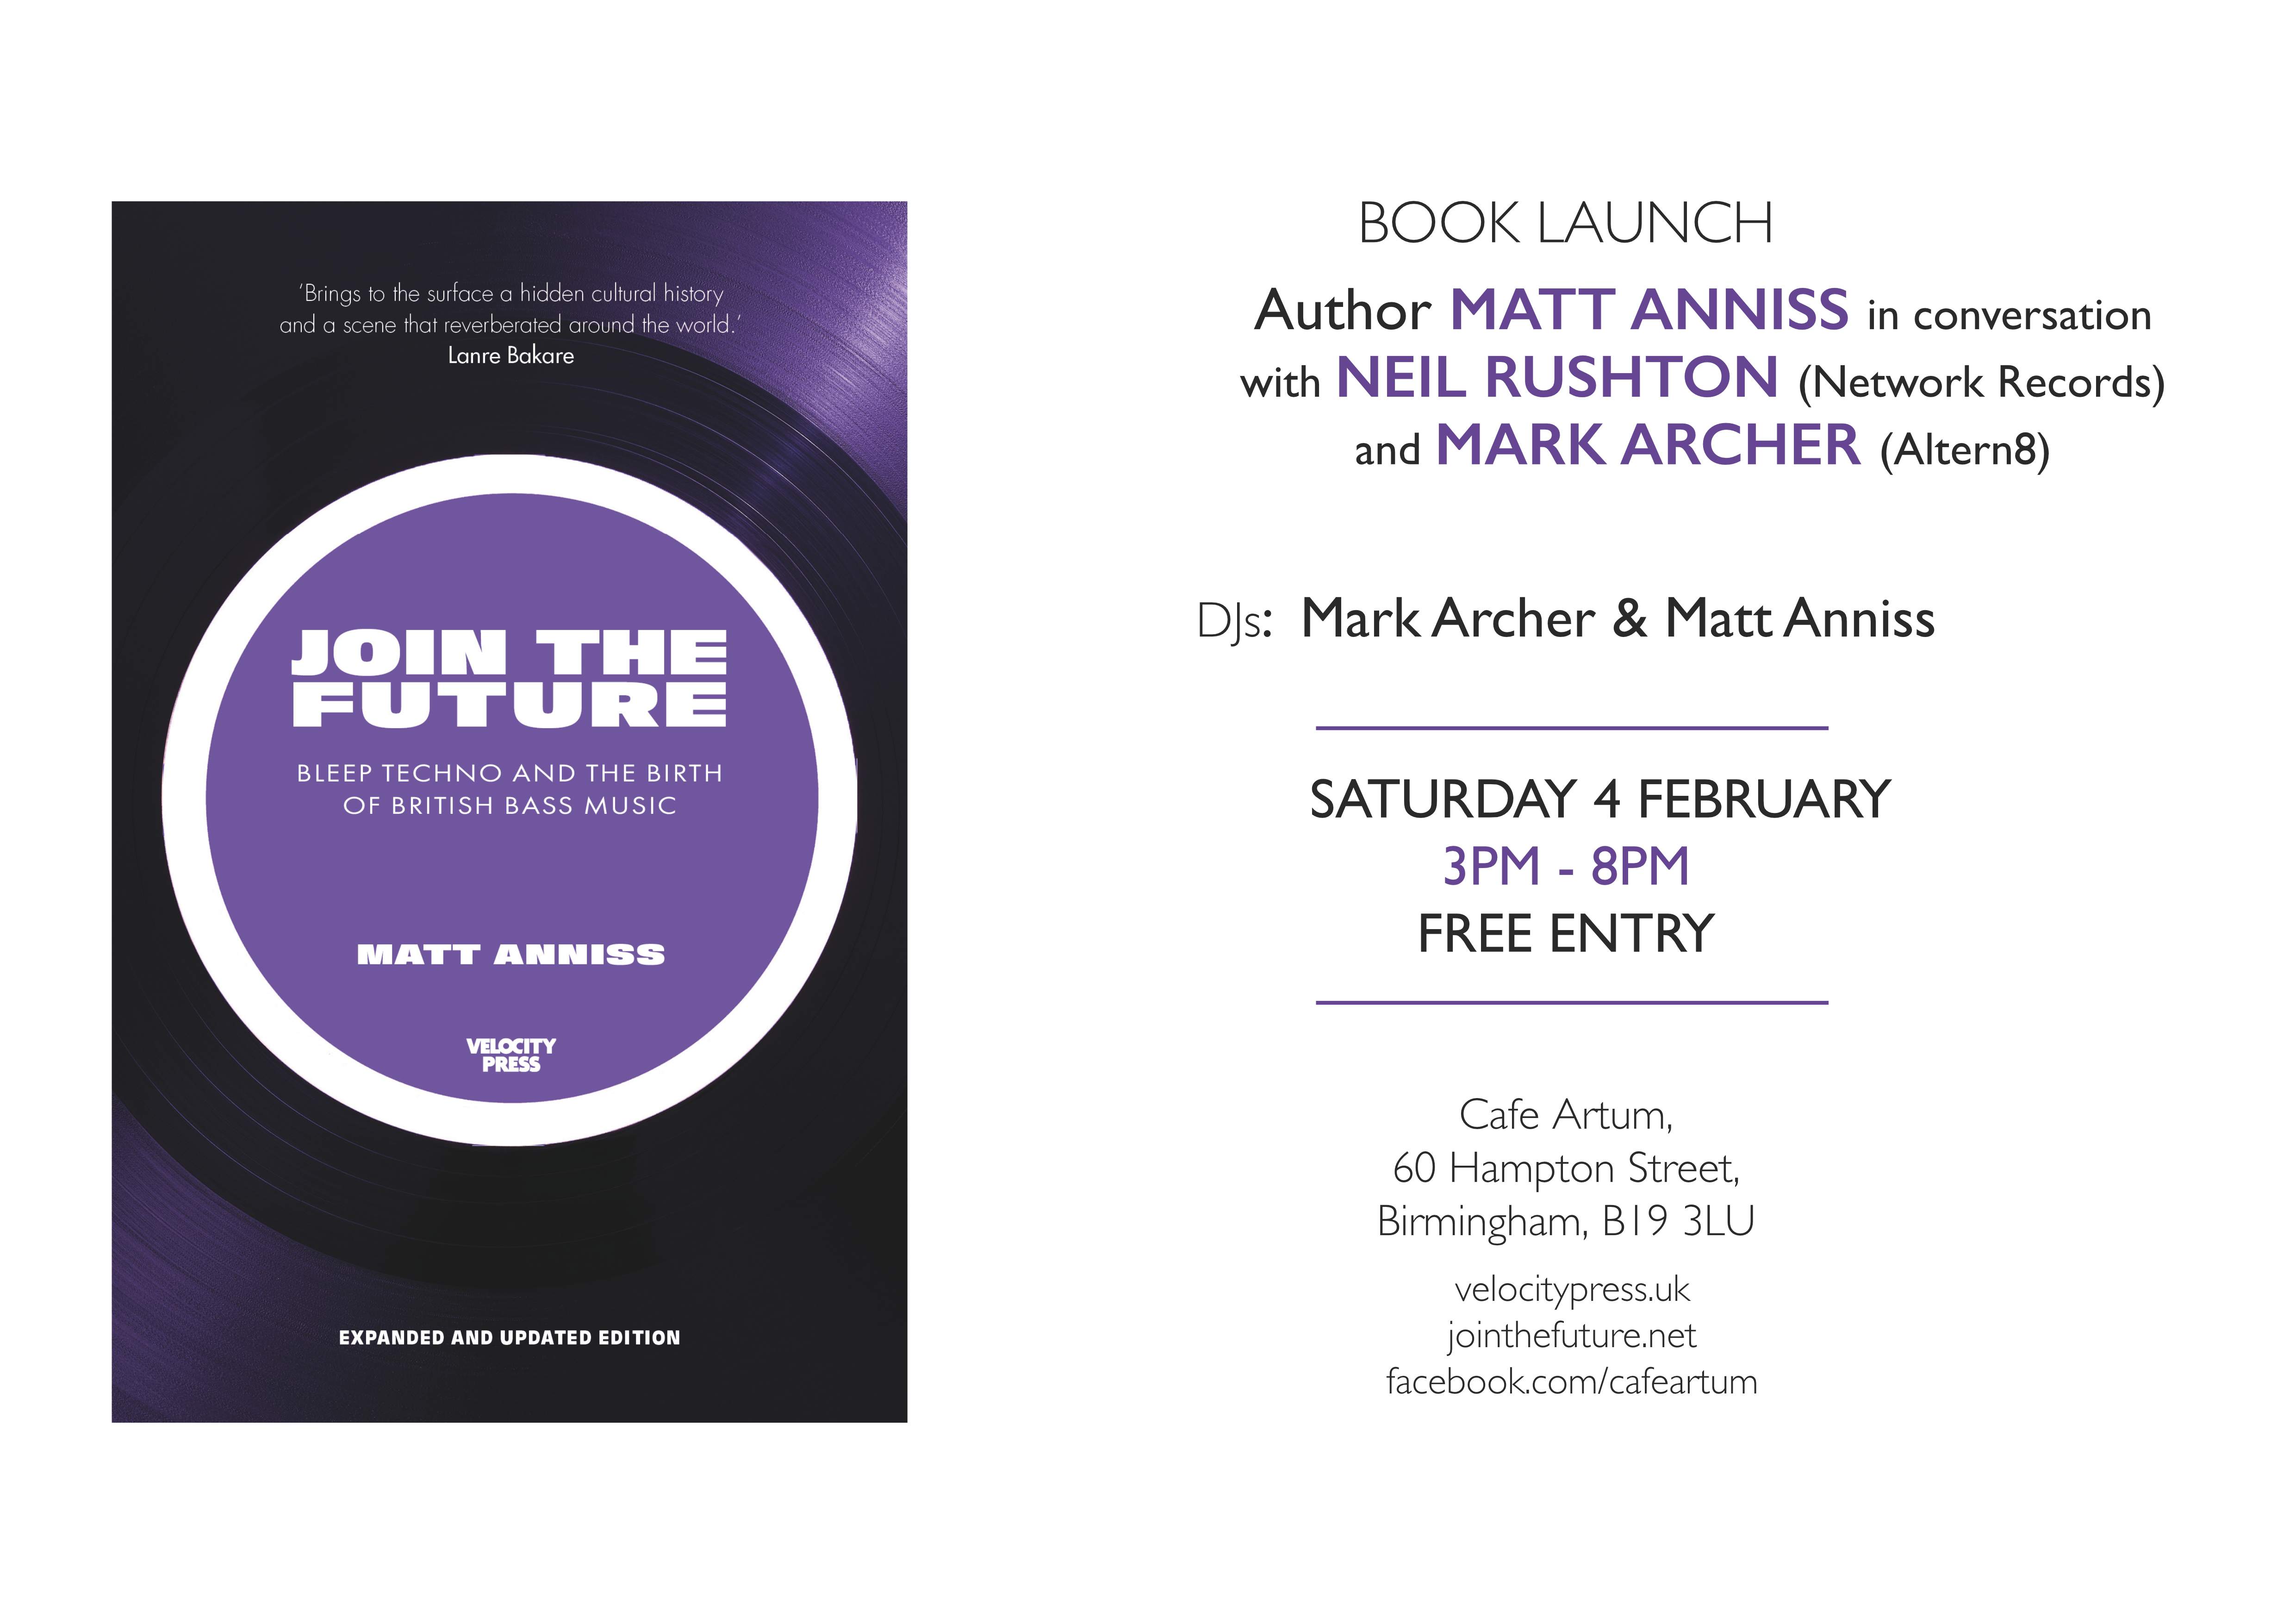 'Join The Future' Book (Re-)Launch - Página frontal